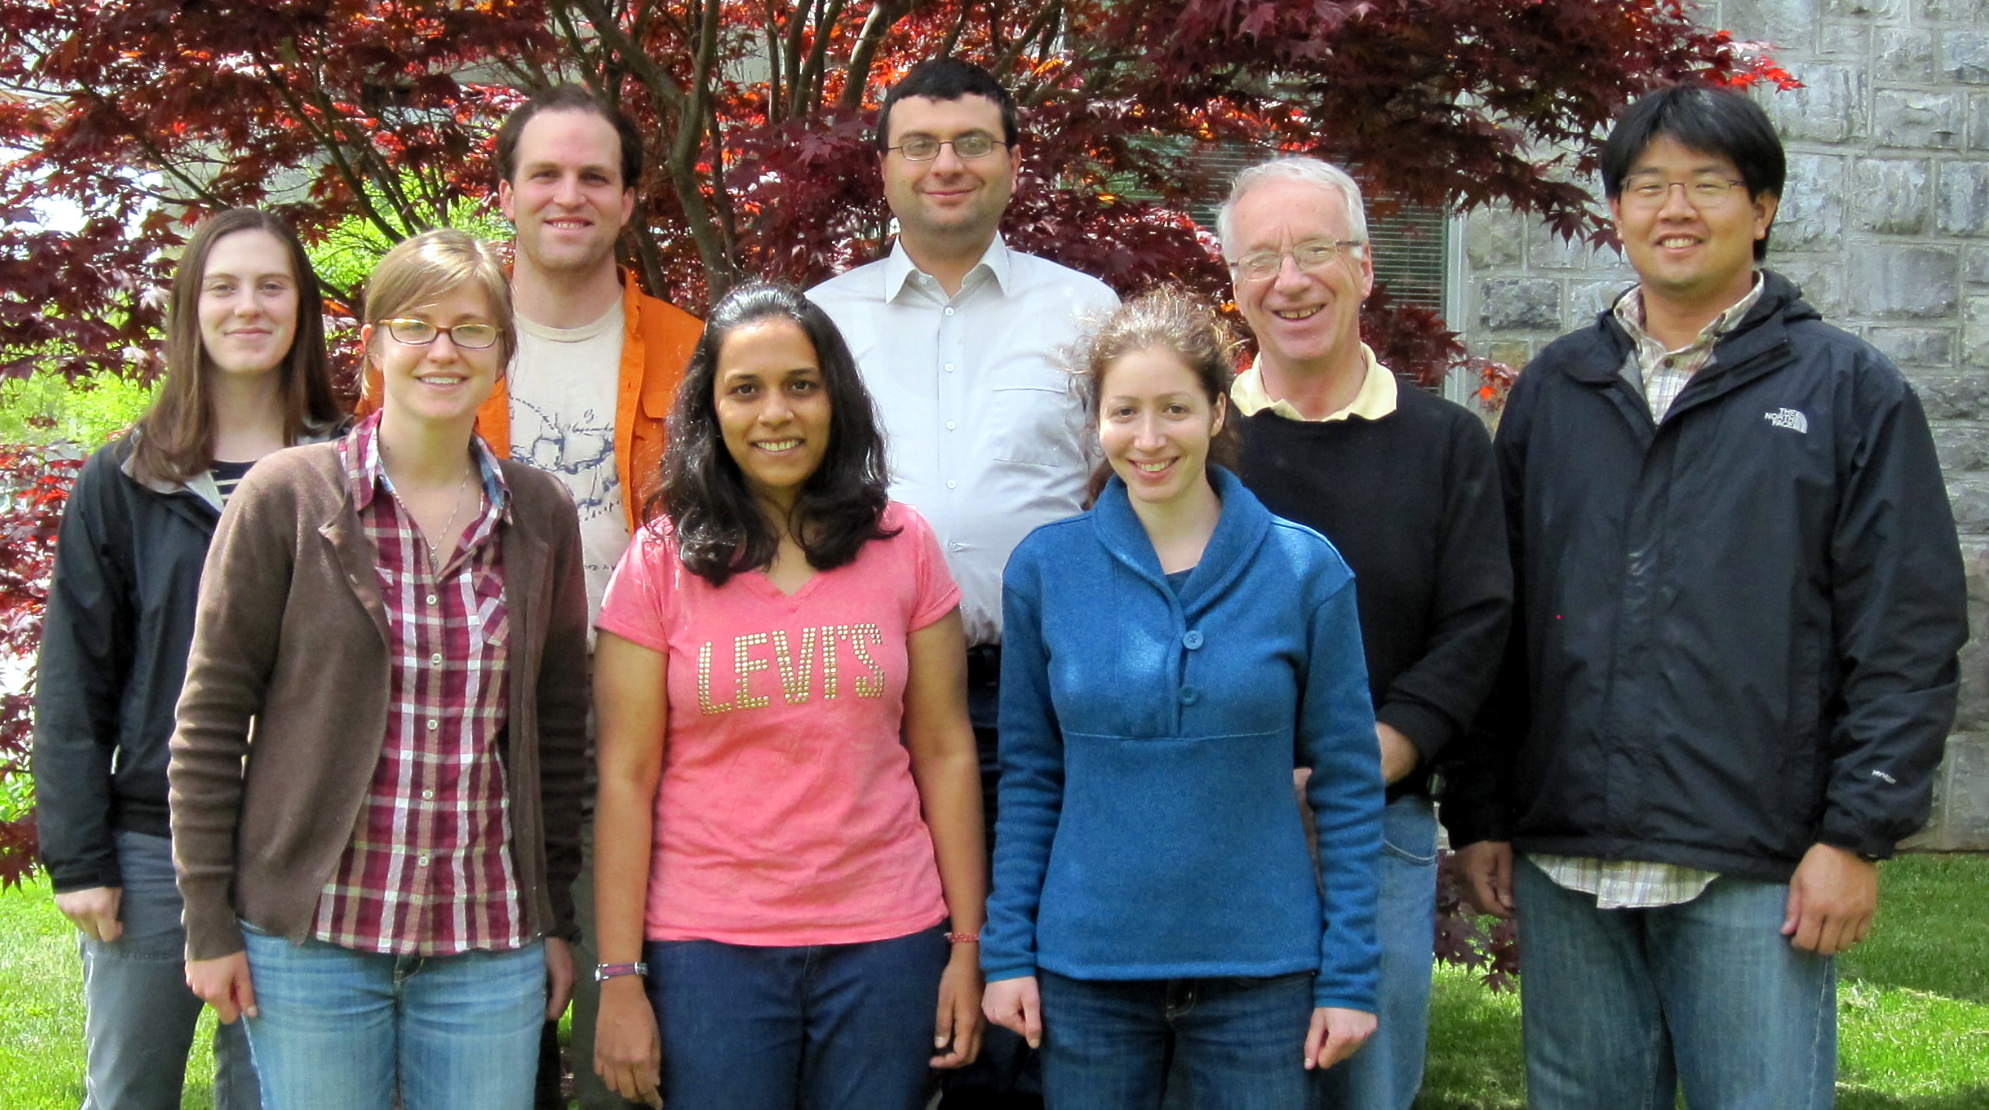 The seven team members and their faculty advisor.